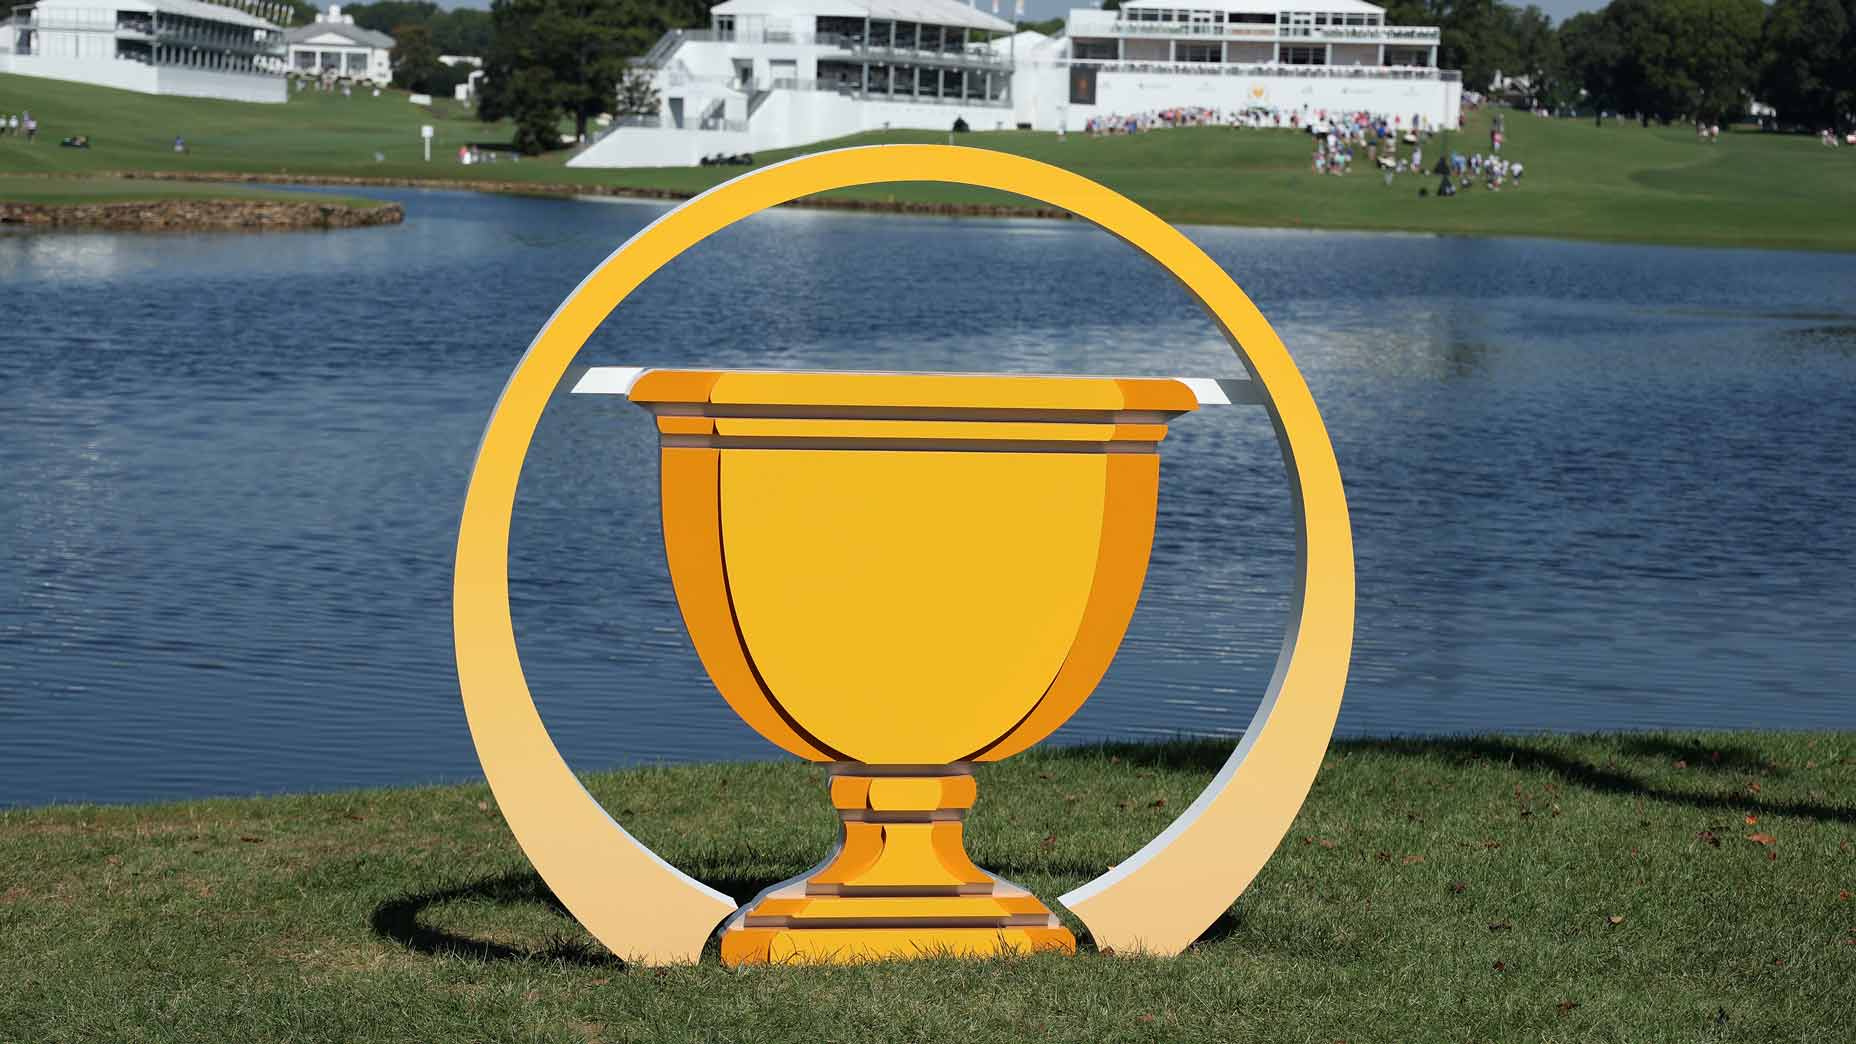 presidents cup channel